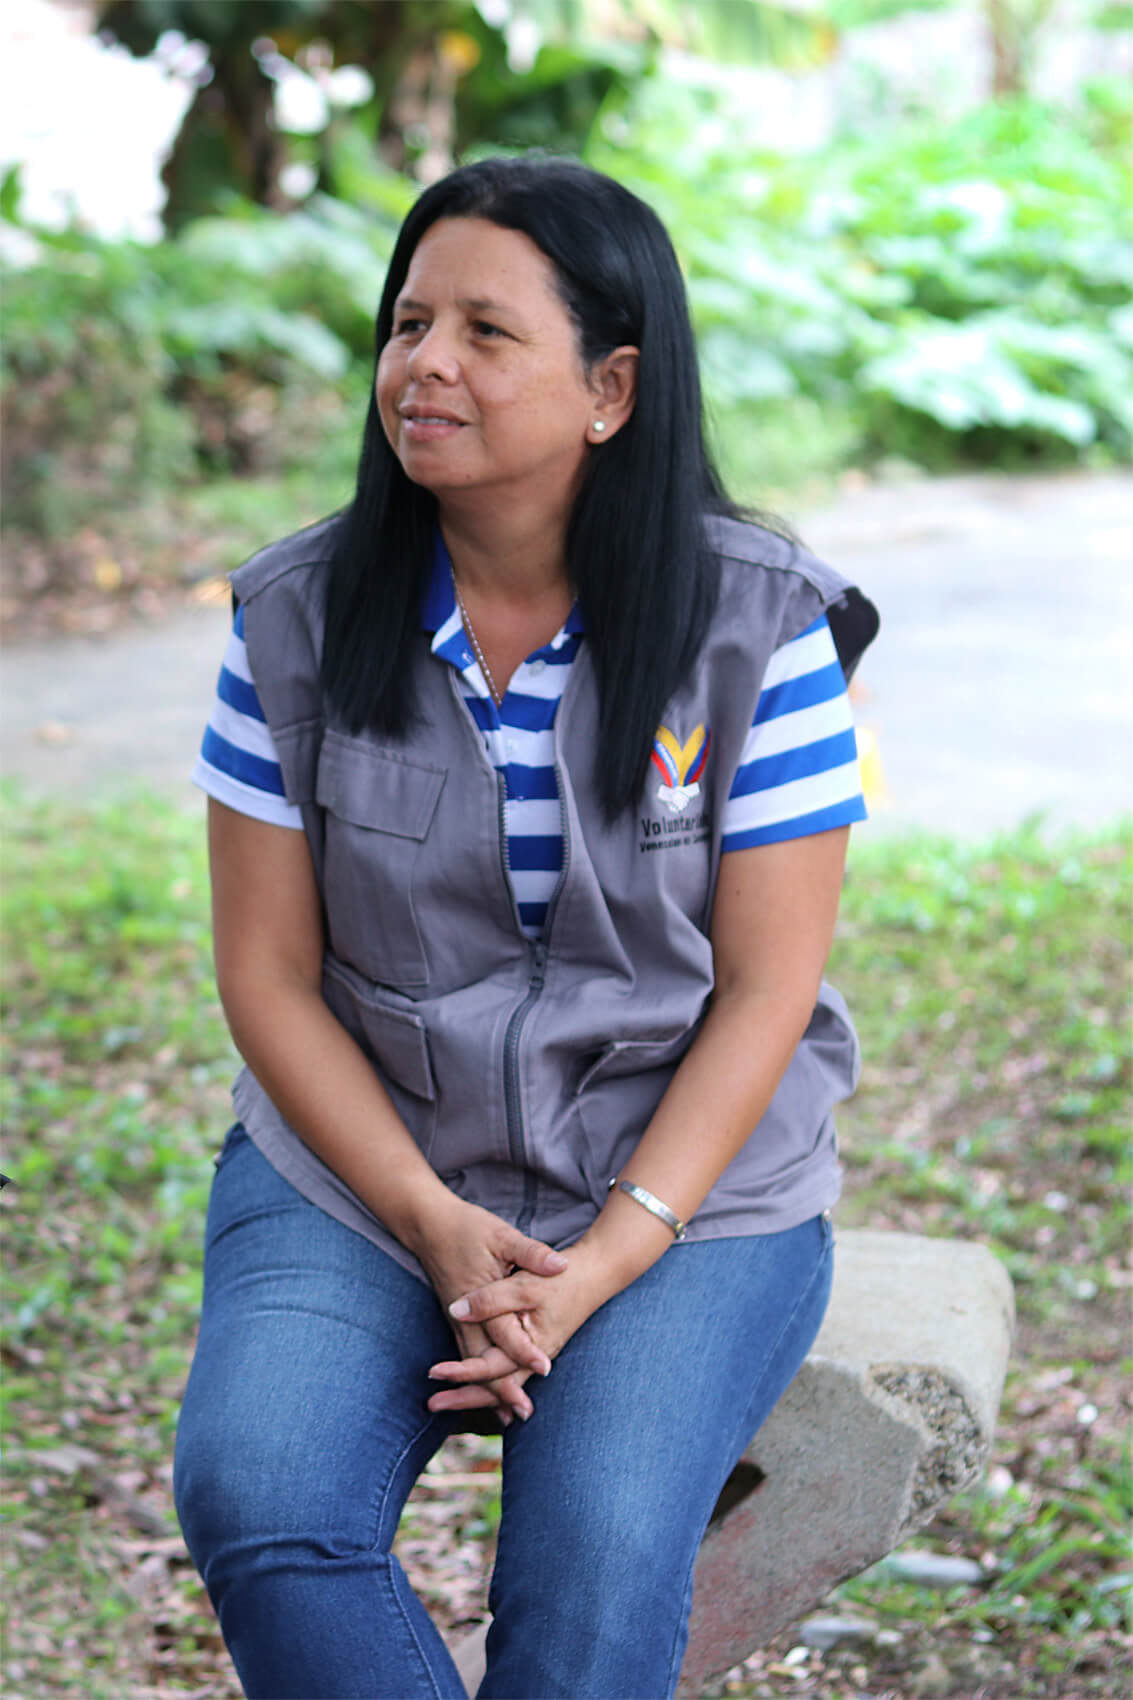 A woman named Lisbeth sits on a concrete bench outside. She wears blue jeans, a blue and white striped polo shirt, and a grey volunteer’s vest.